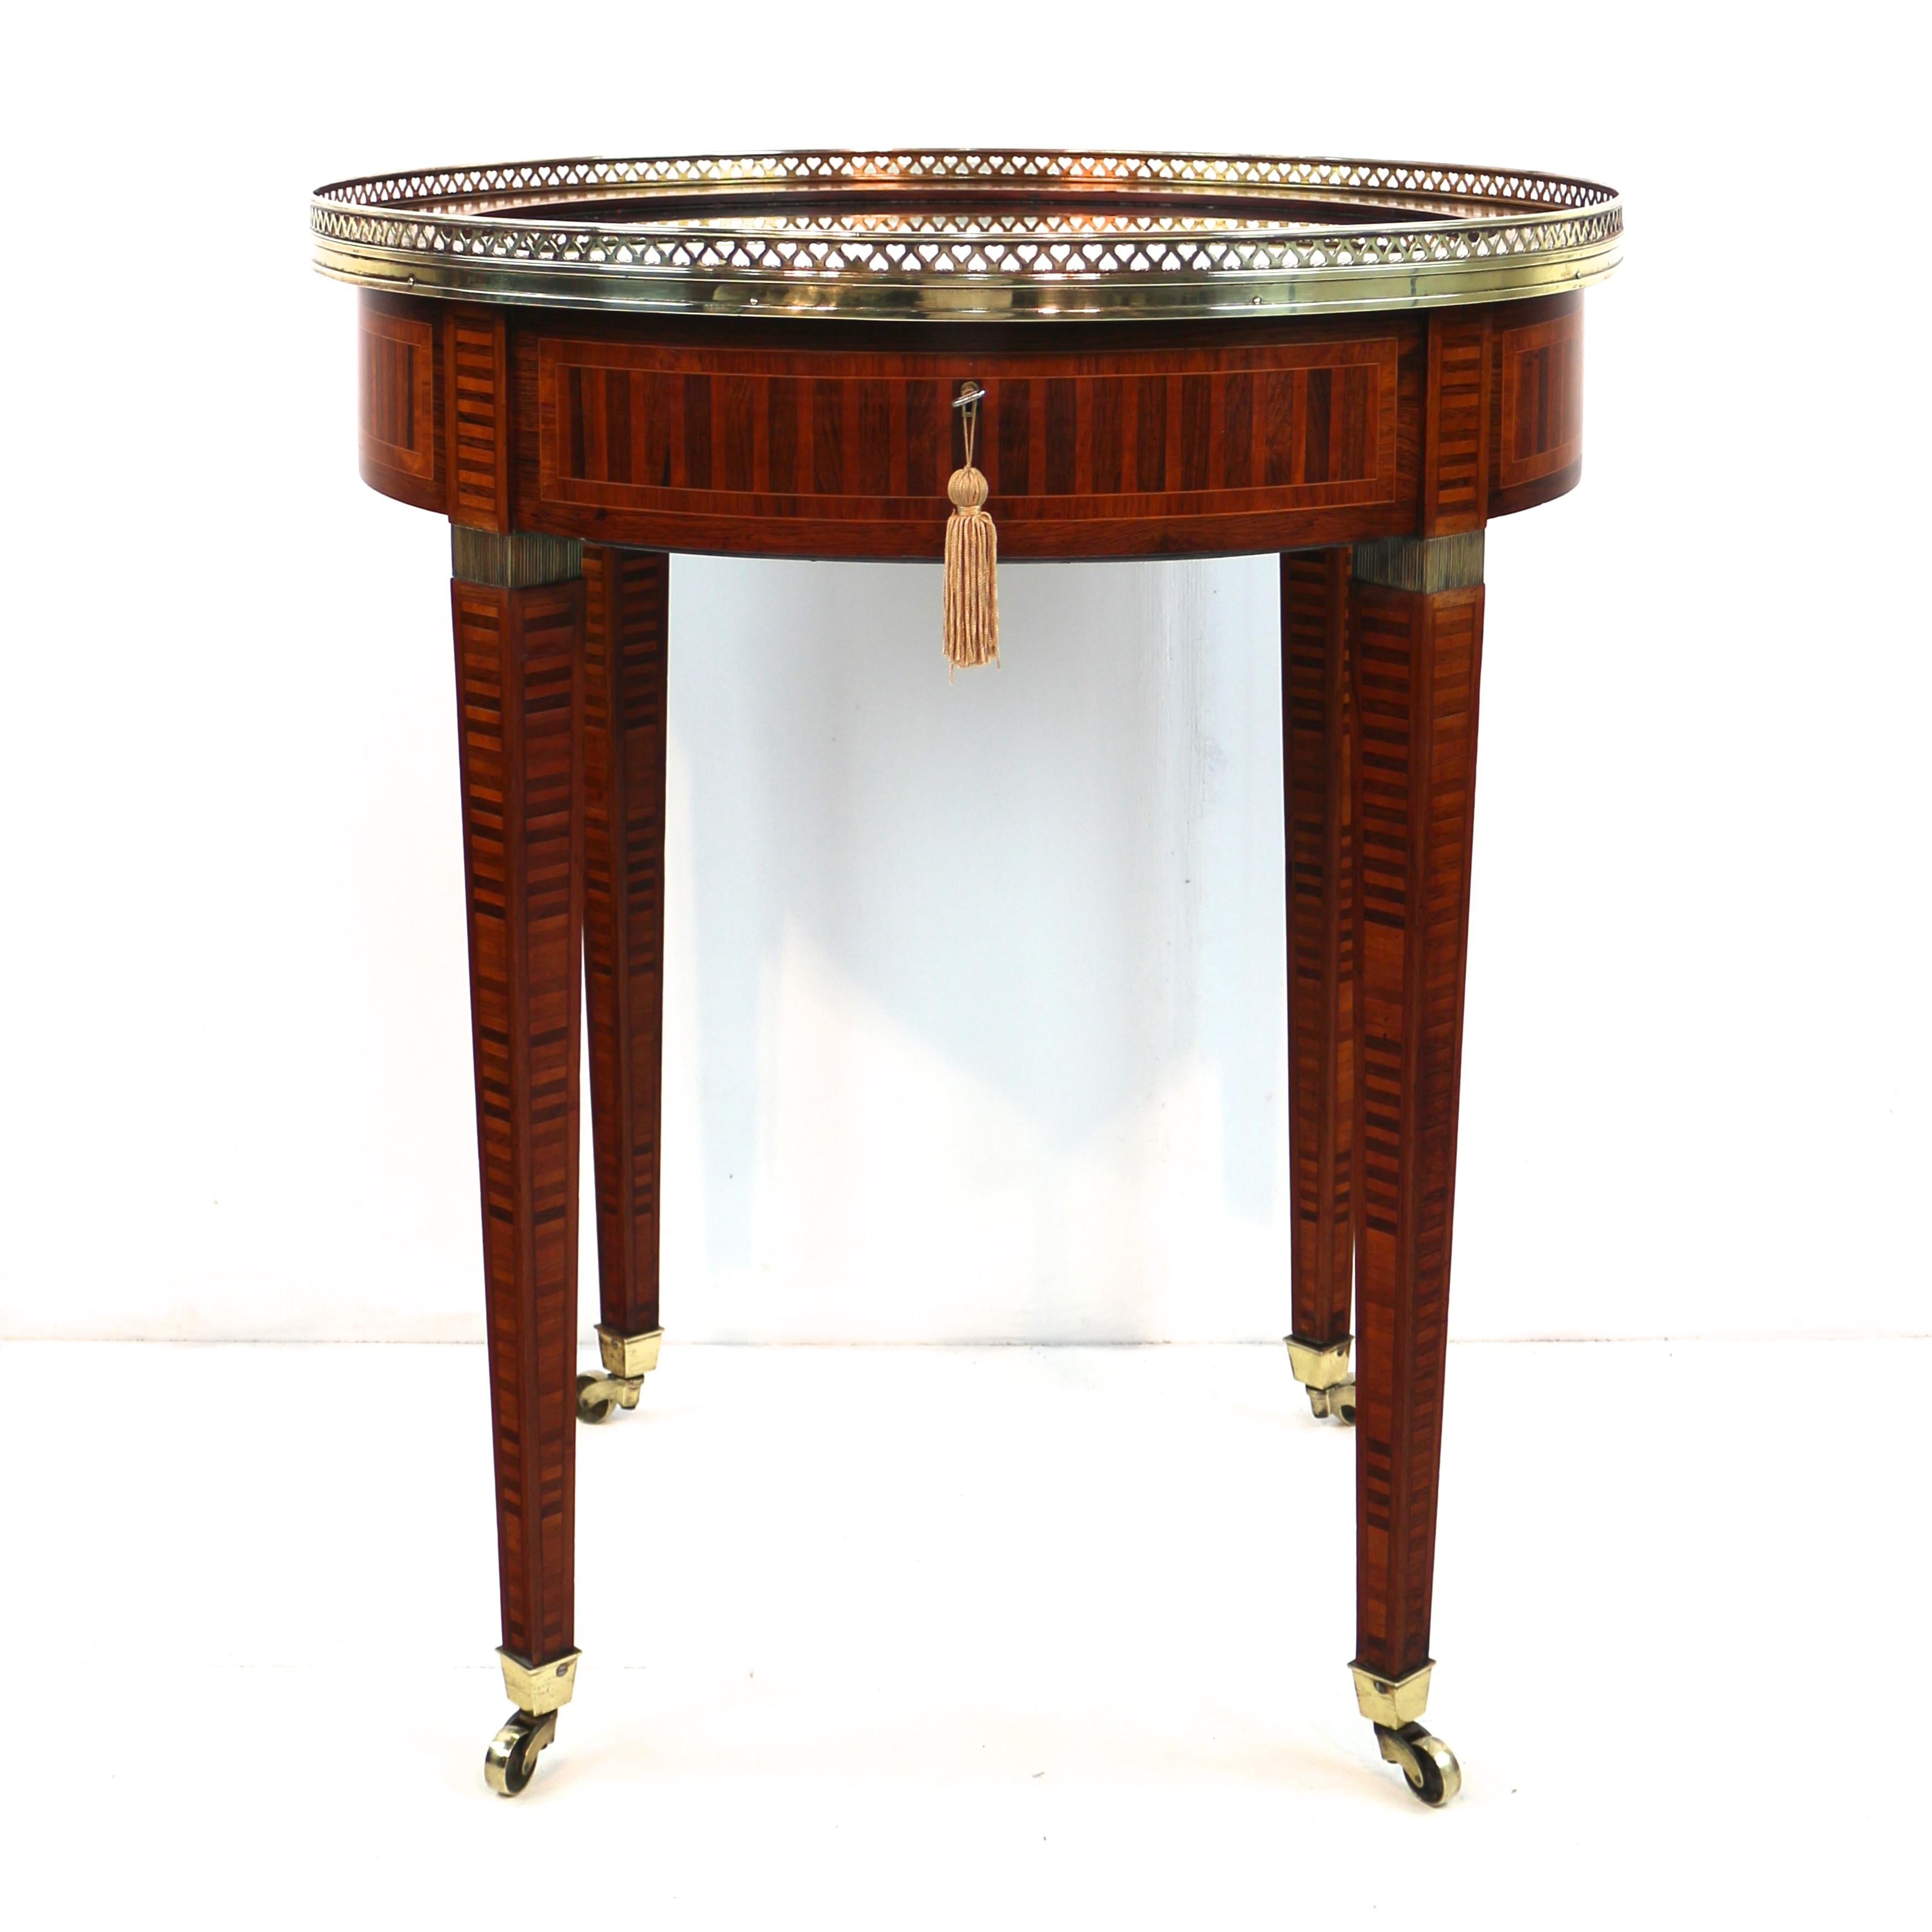 Hand-Crafted Antique English Victorian Sheraton Revival Rosewood & Parquetry Bijouterie Table For Sale